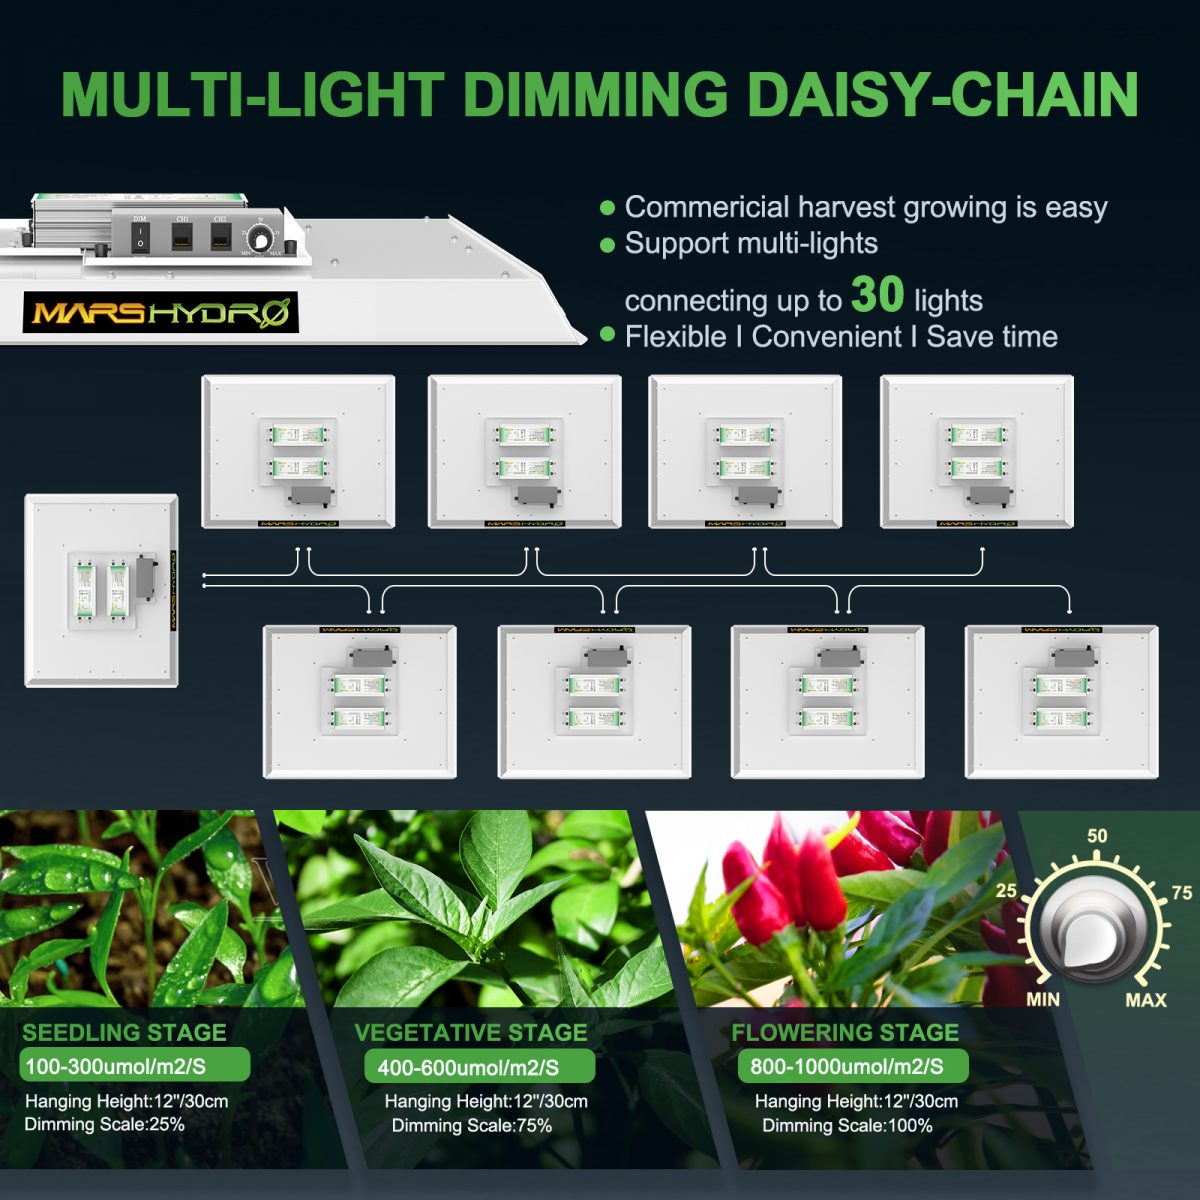 Dimmable Feature & Daisy-Chain Function: With an independent dimming knob on the removable driver, supporting 0-100% brightness adjustment and up to 15 LEDs daisy-chained in series, it provides varying light intensity for different plant stages while saving energy.